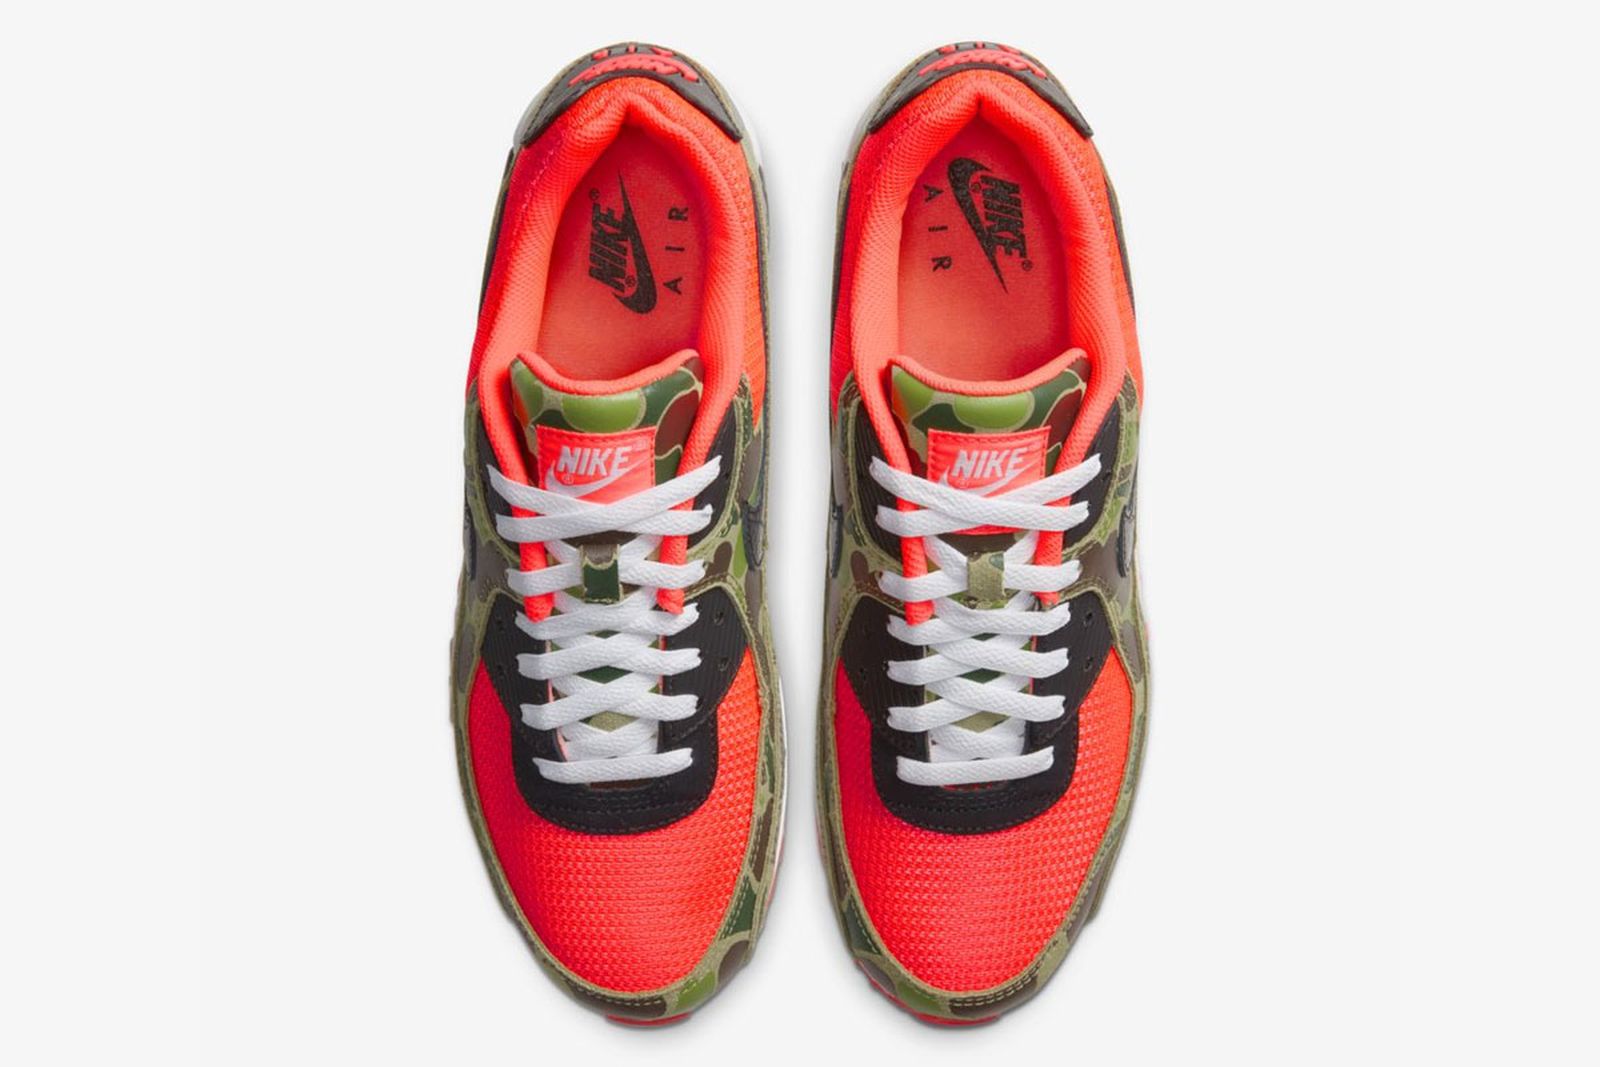 Nike duck camo air max Air Max 90 “Reverse Duck Camo”: How & Where to Buy Today